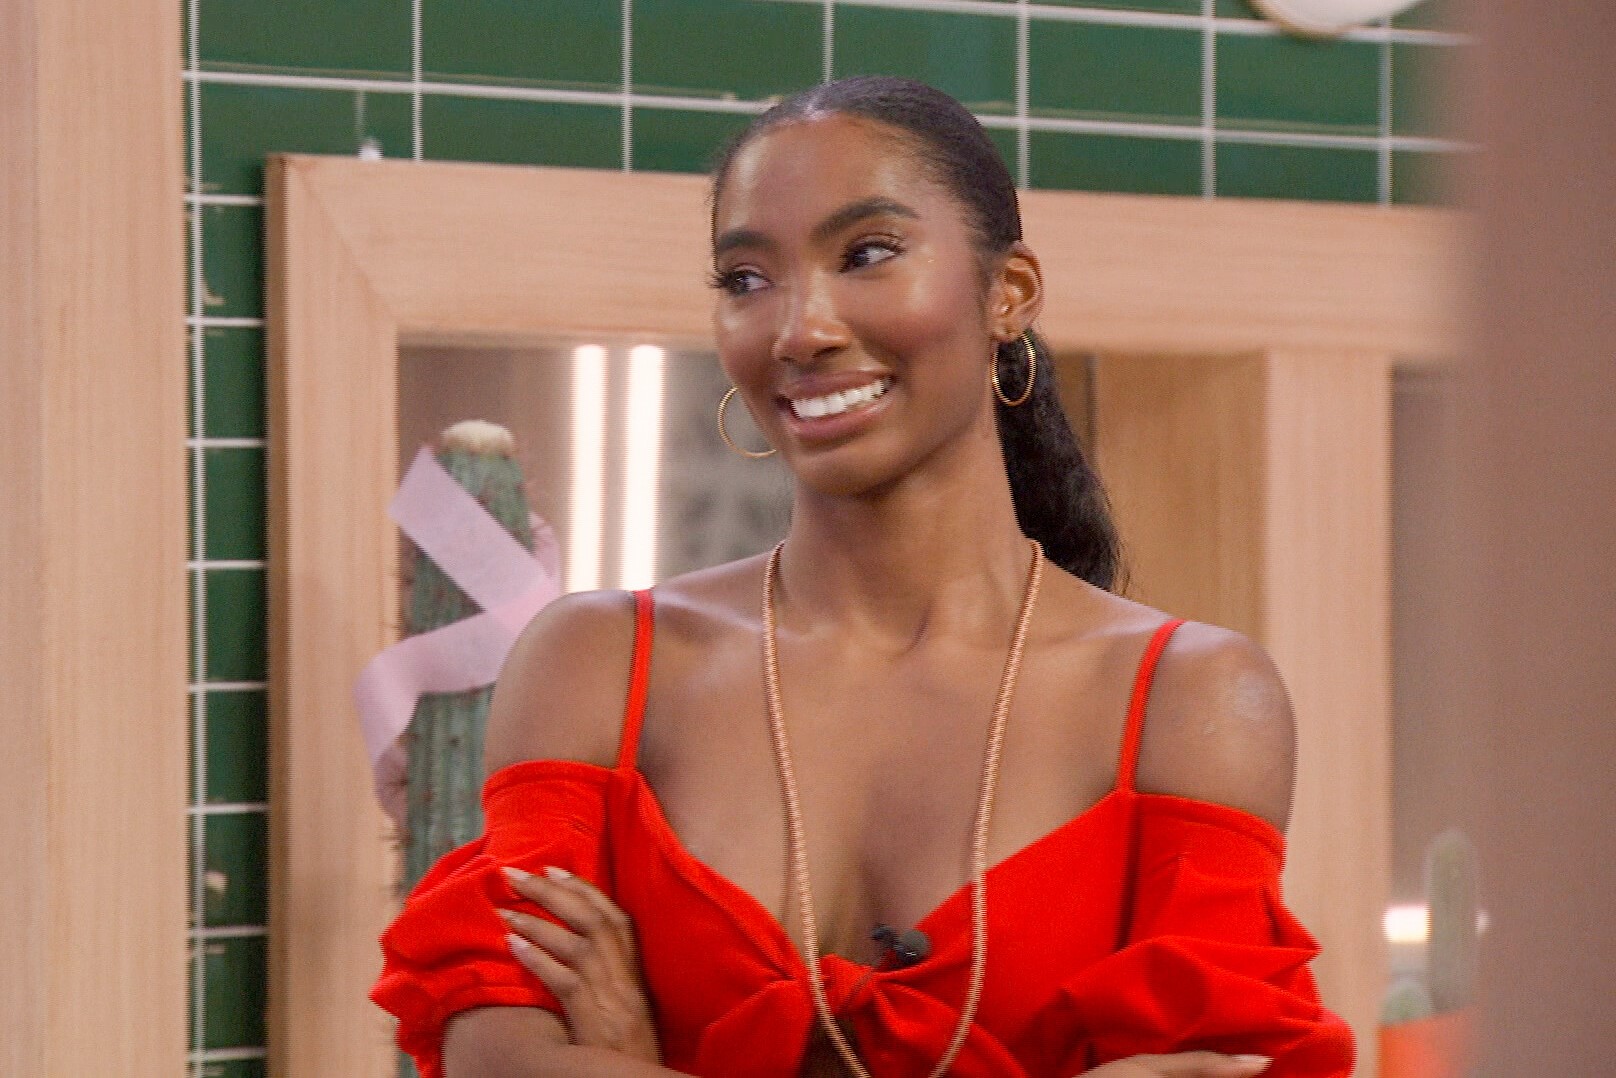 Taylor Hale, who, according to 'Big Brother 24' spoilers, made the final three, wears a red dress and the HOH key around her neck.